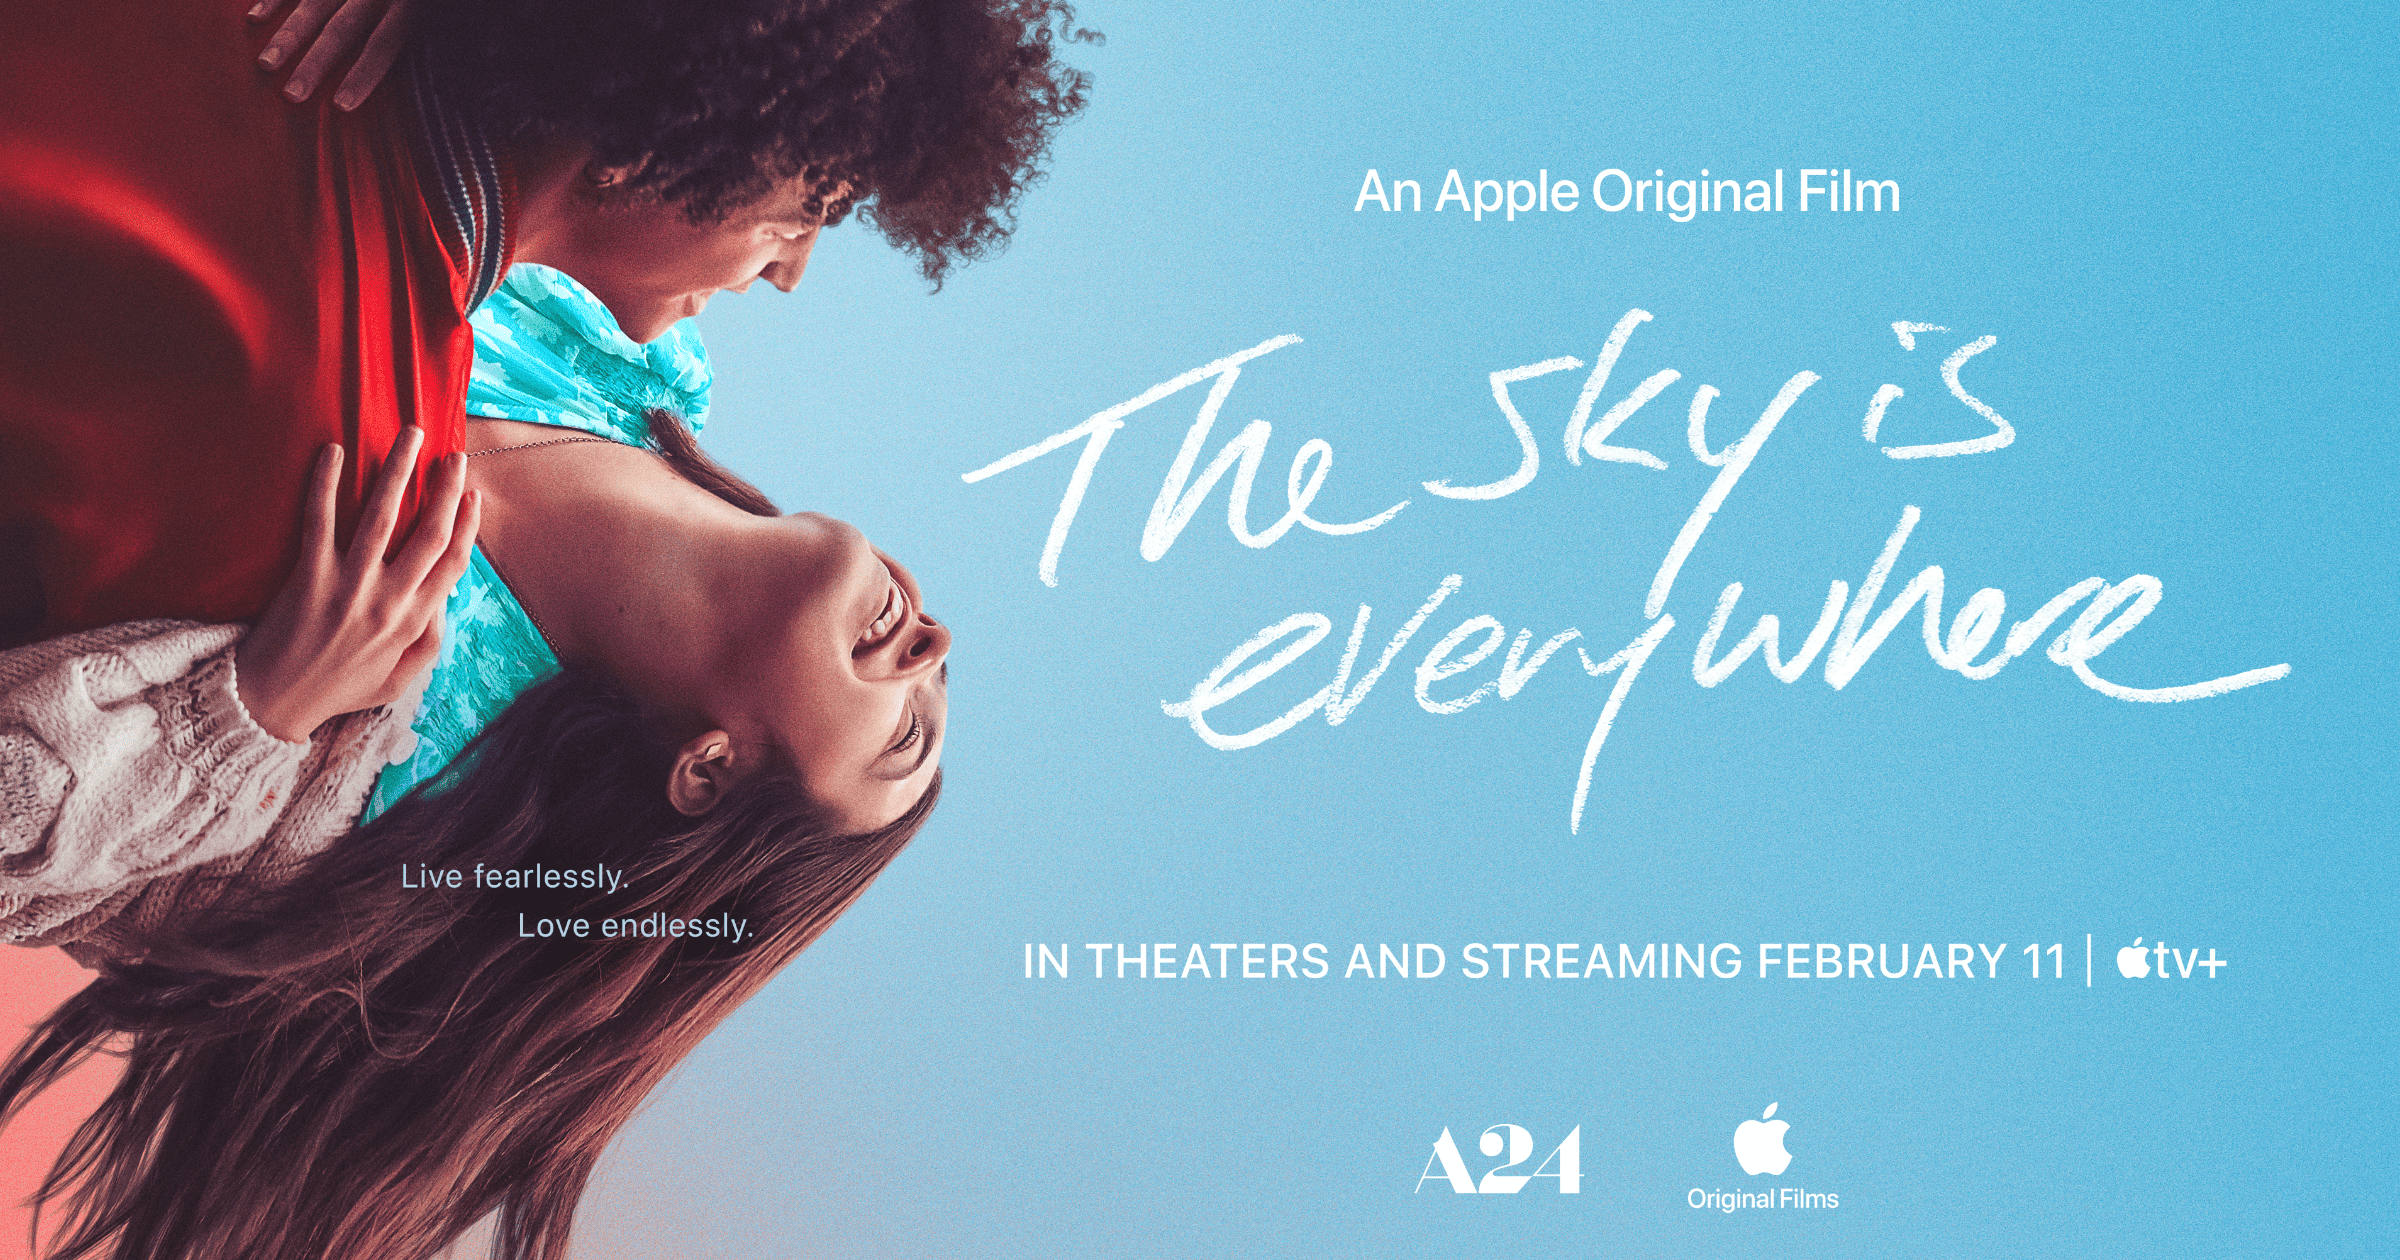 Apple TV+: ‘The Sky is Everywhere’ to Premiere Valentine’s Weekend